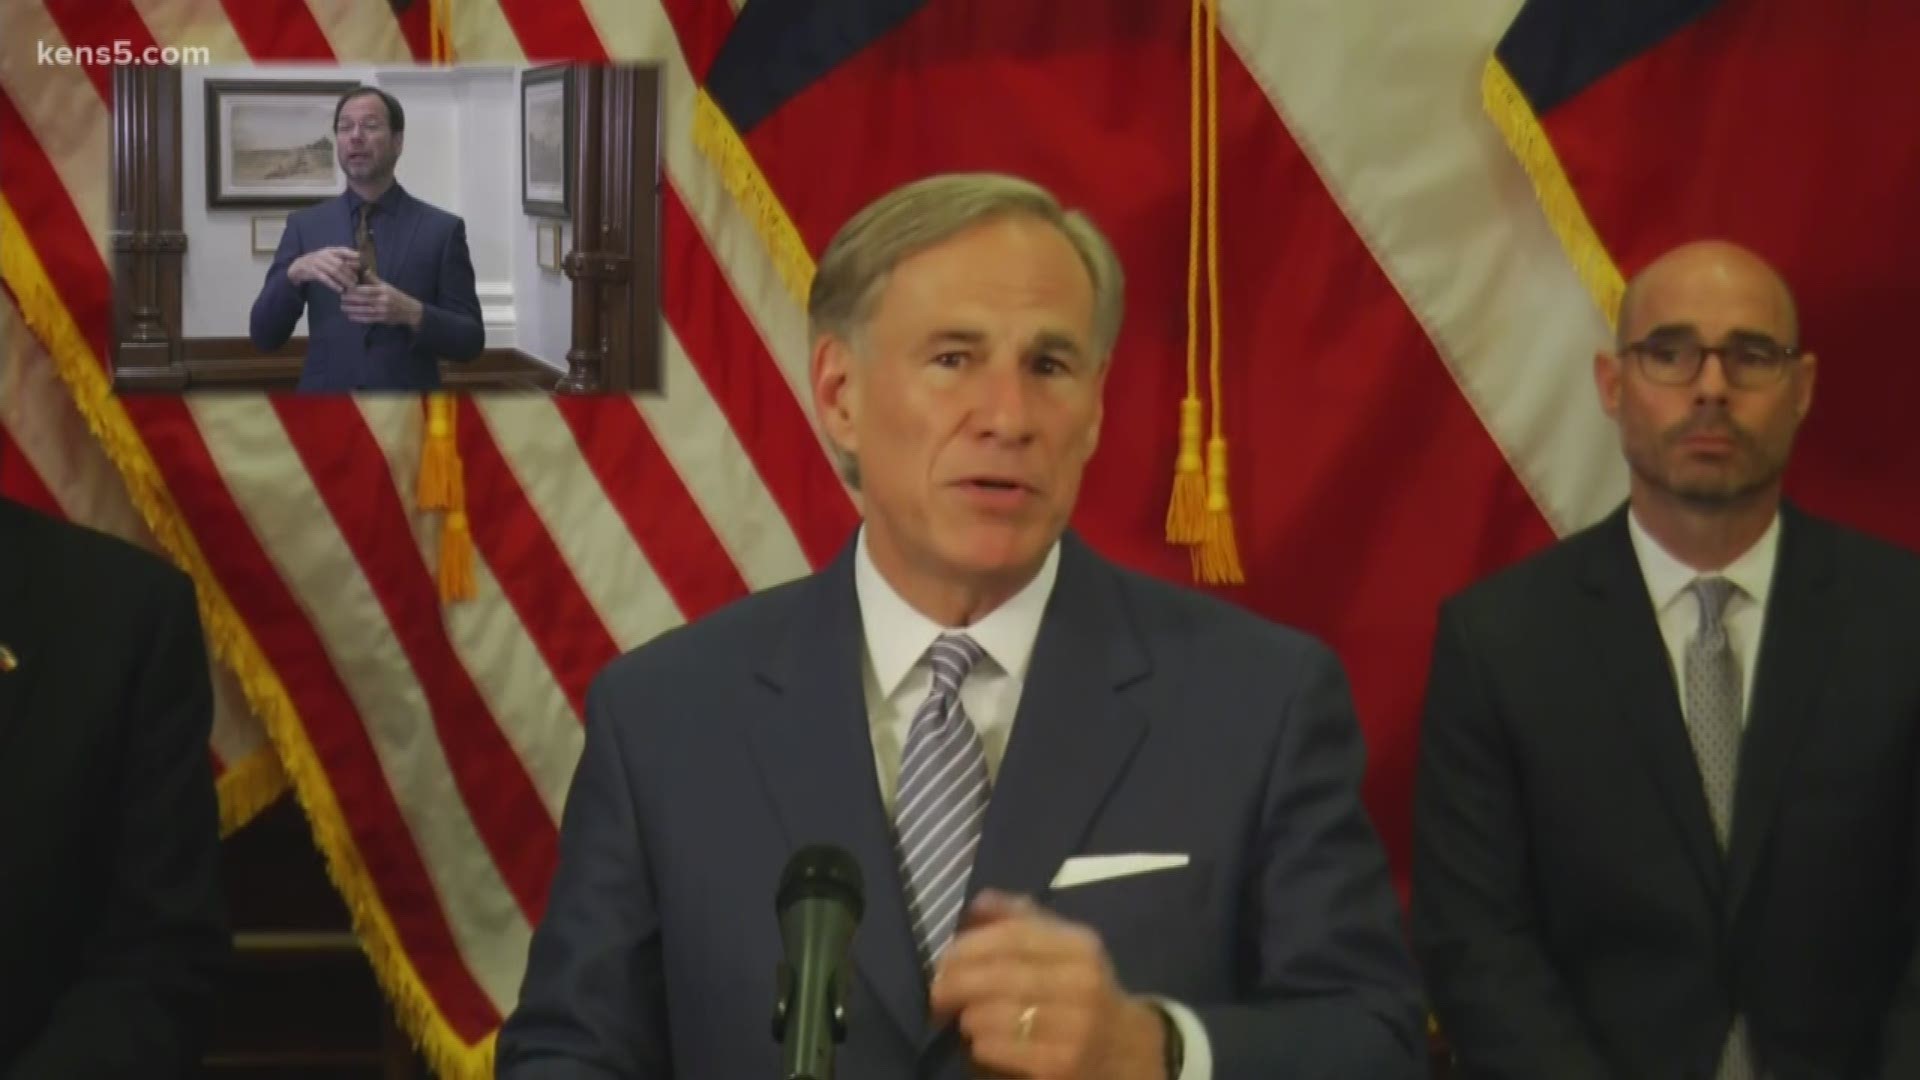 The Texas governor is announcing plans to gradually restore the Texas economy in various stages.